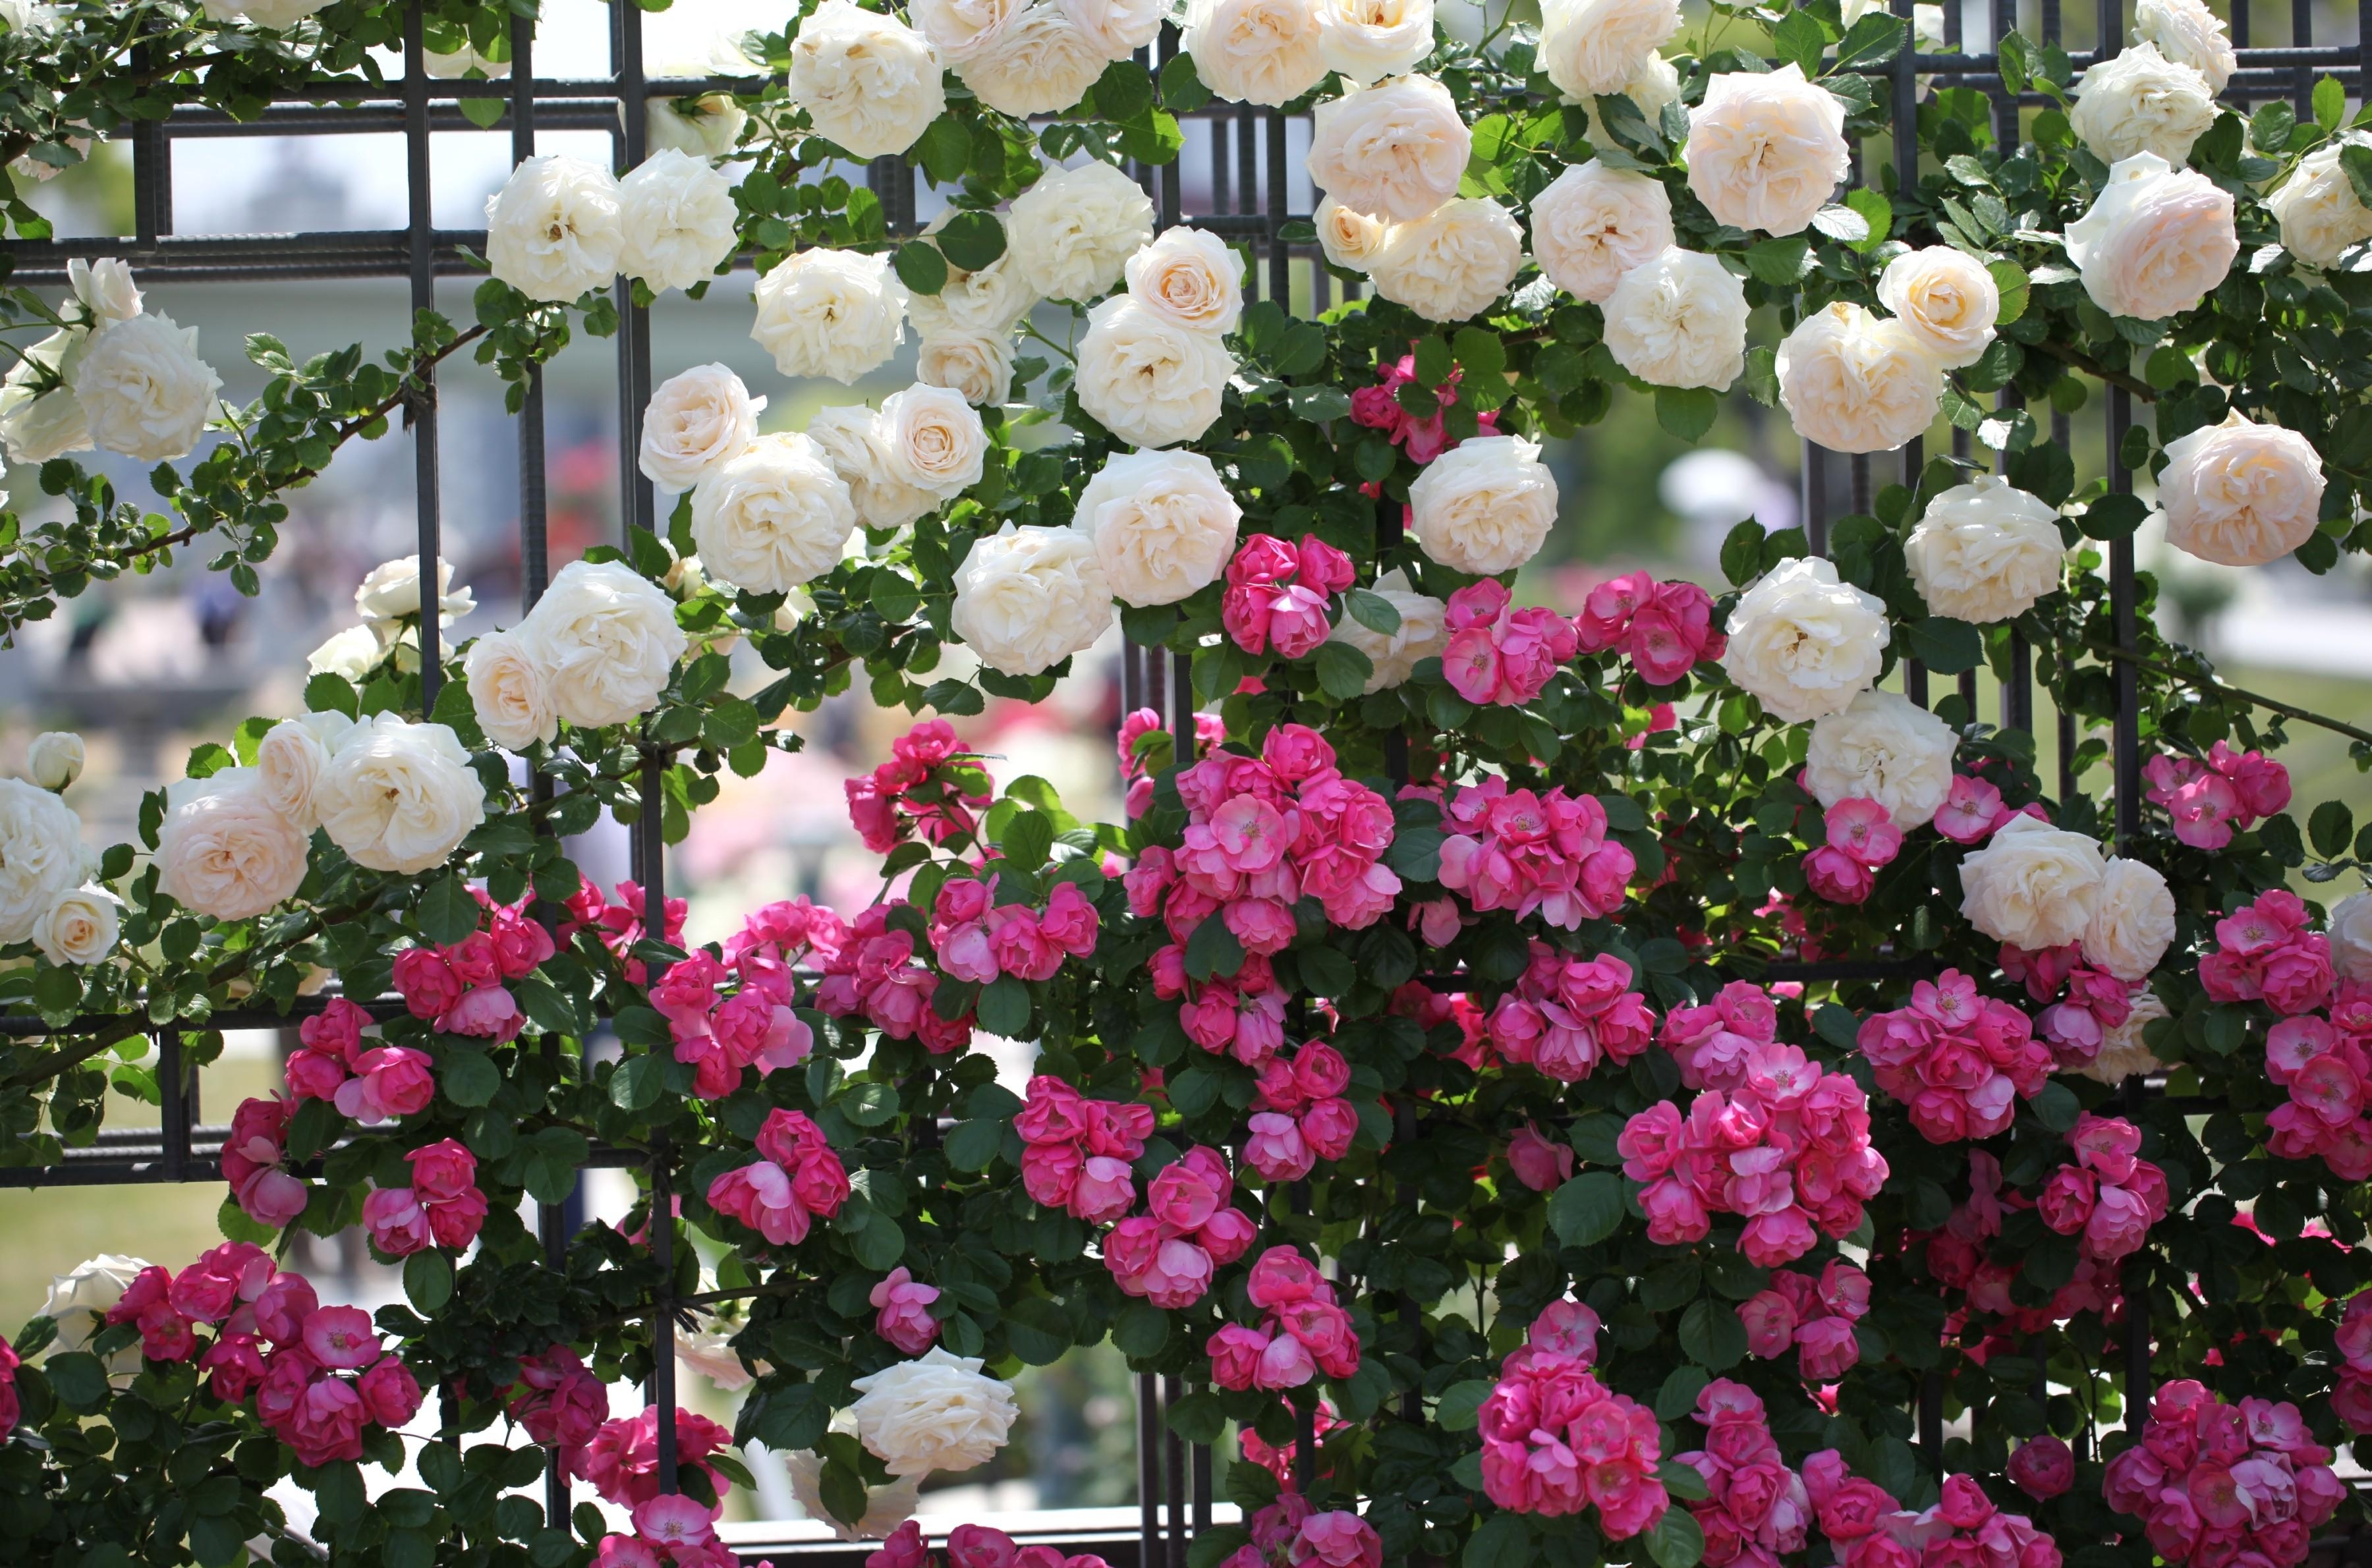 it's beautiful, roses, flowers, greens, fence, handsomely, different 2160p